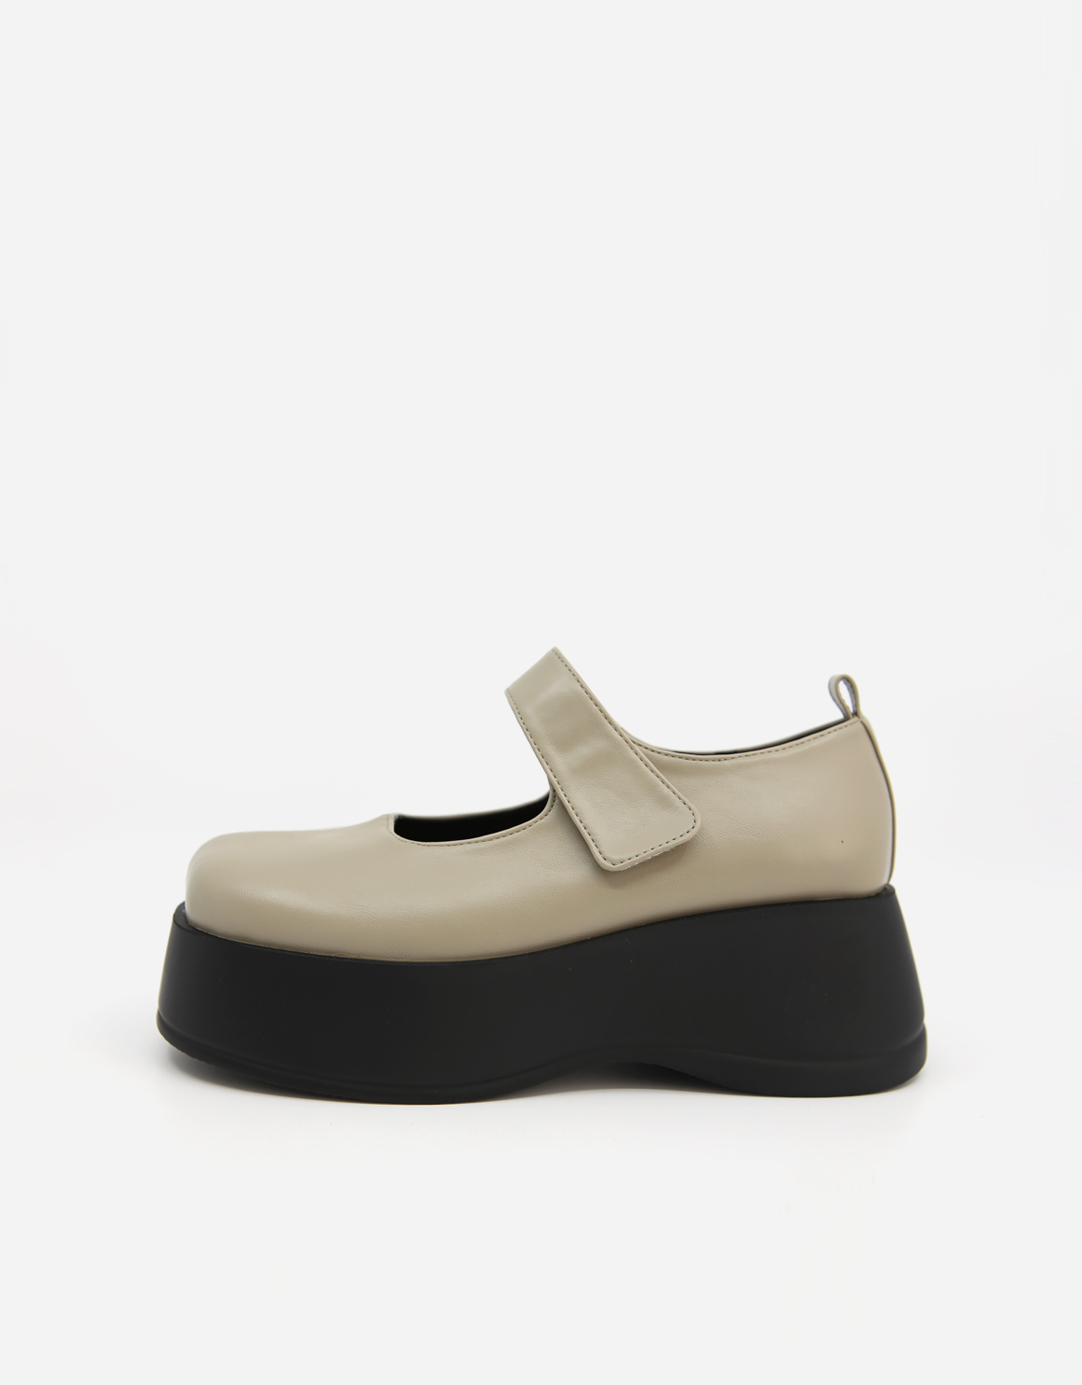 ROUND MARY JANE FLAT LOAFER